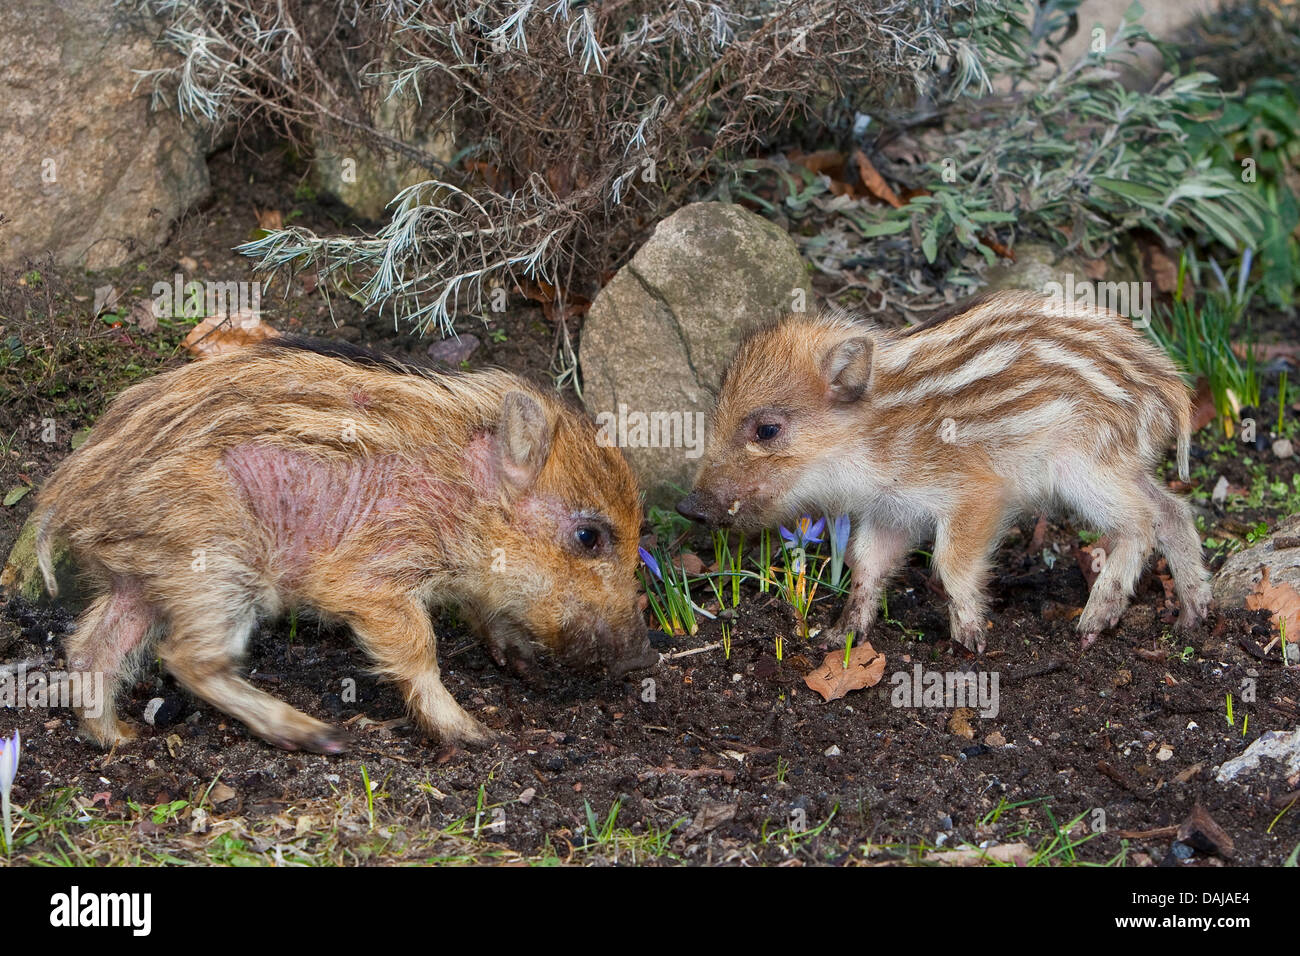 wild boar, pig, wild boar (Sus scrofa), gentle young animals playing and rooting in the garden, one shote with scabies, Germany Stock Photo